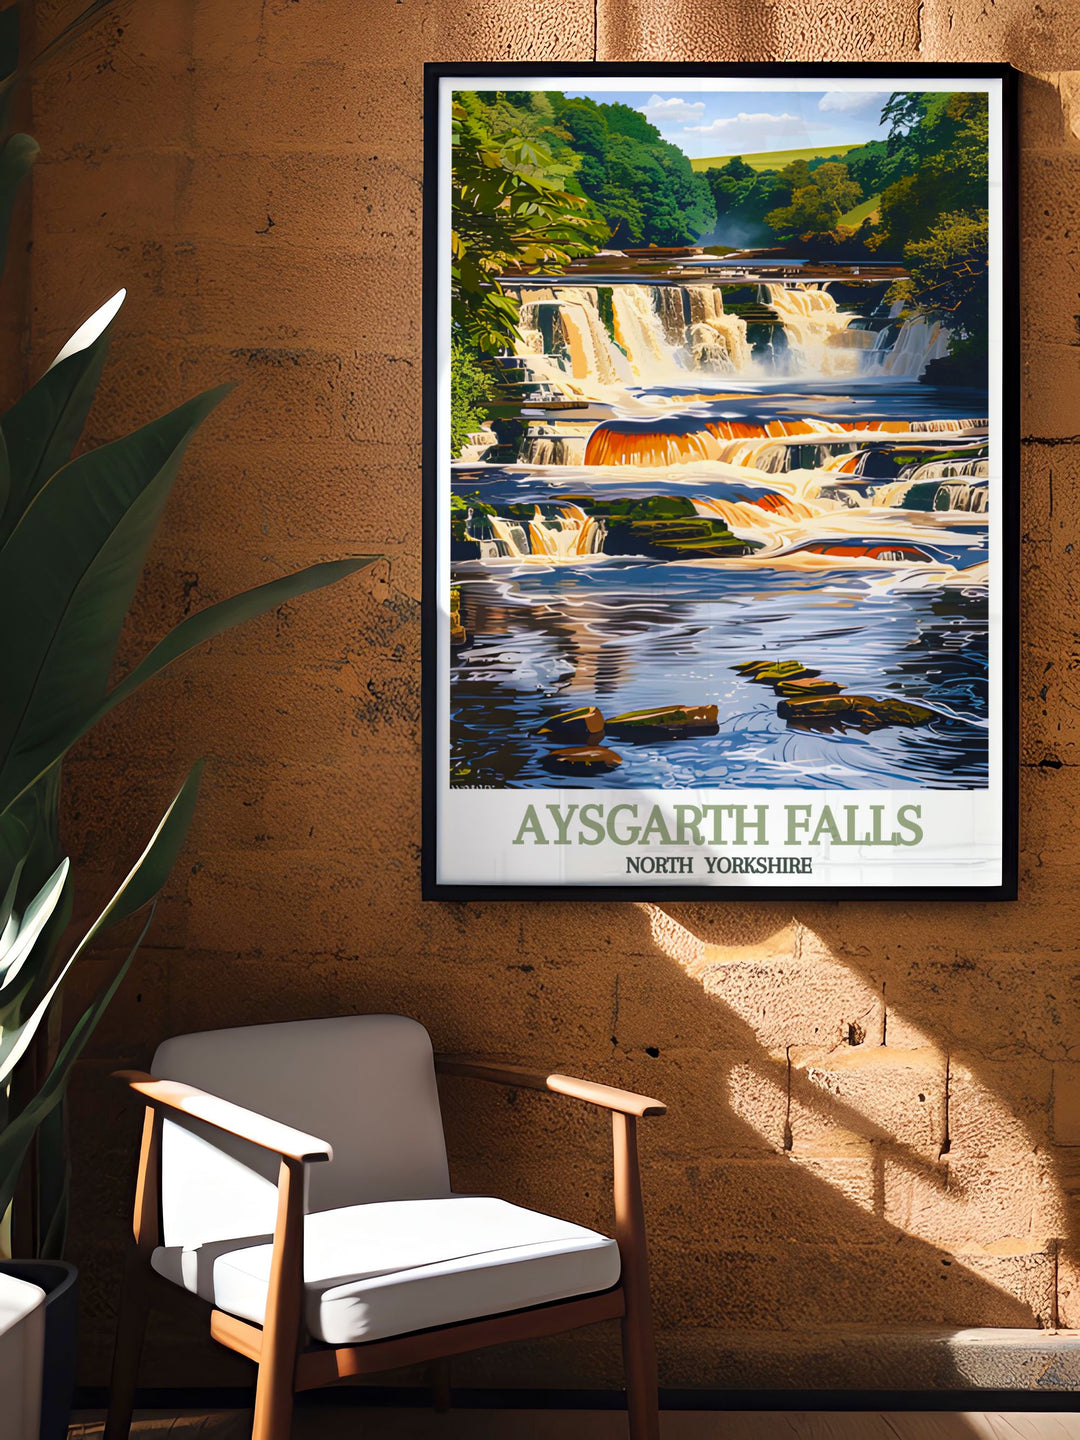 Framed print of Aysgarth Falls an exquisite representation of the Yorkshire Dales National Park ideal for enhancing home interiors with a touch of natural beauty this retro travel poster adds a classic and timeless element to your decor.